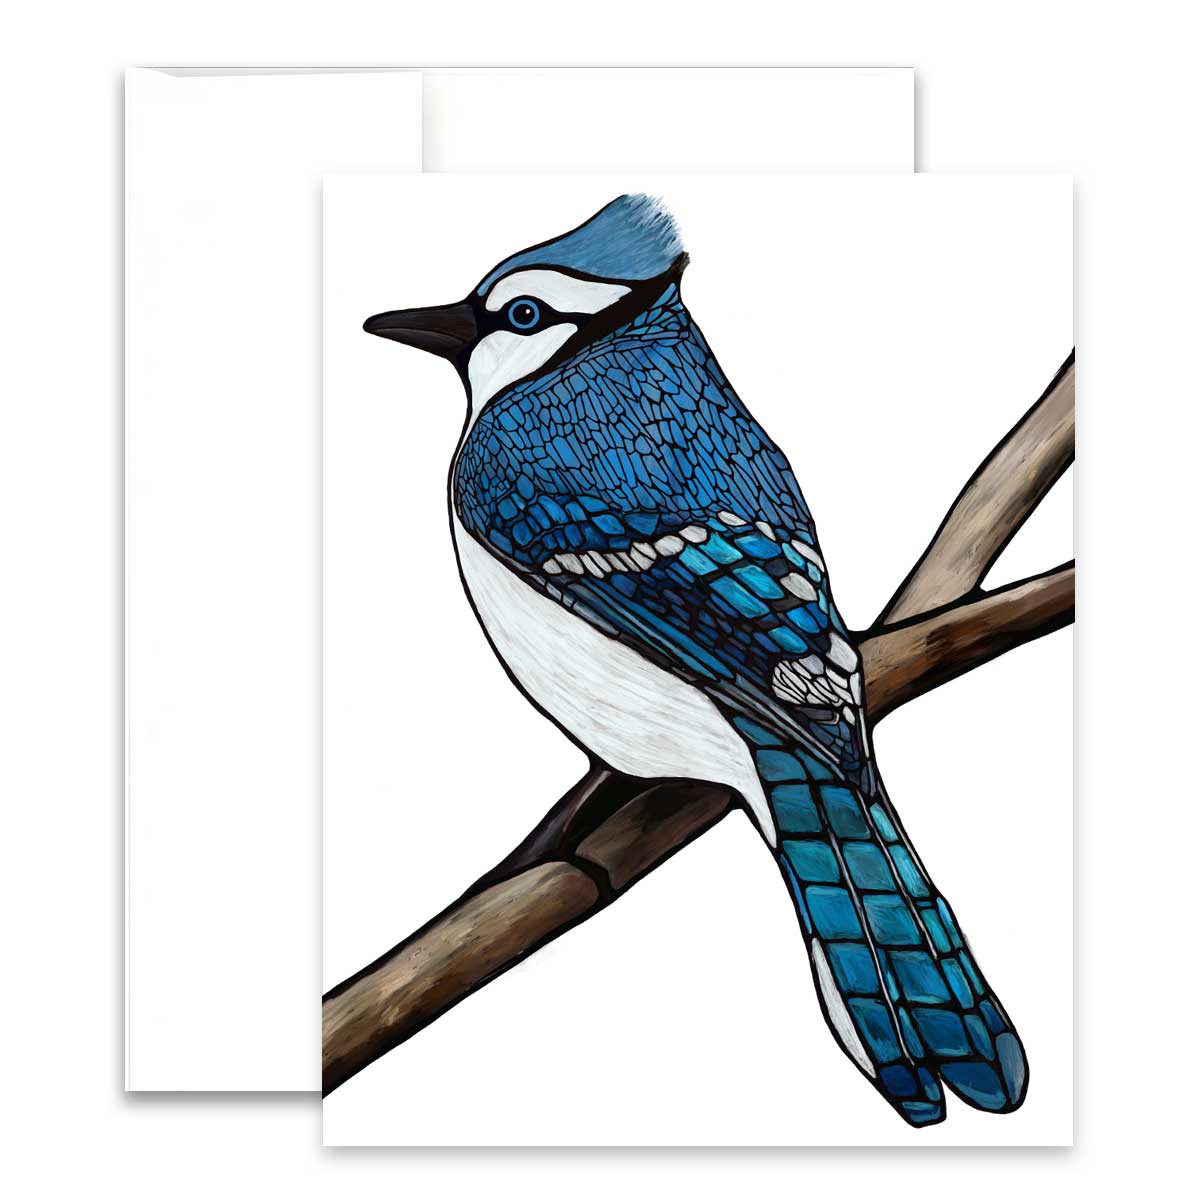 Pack of 5 Greeting Cards - Canadian Birds